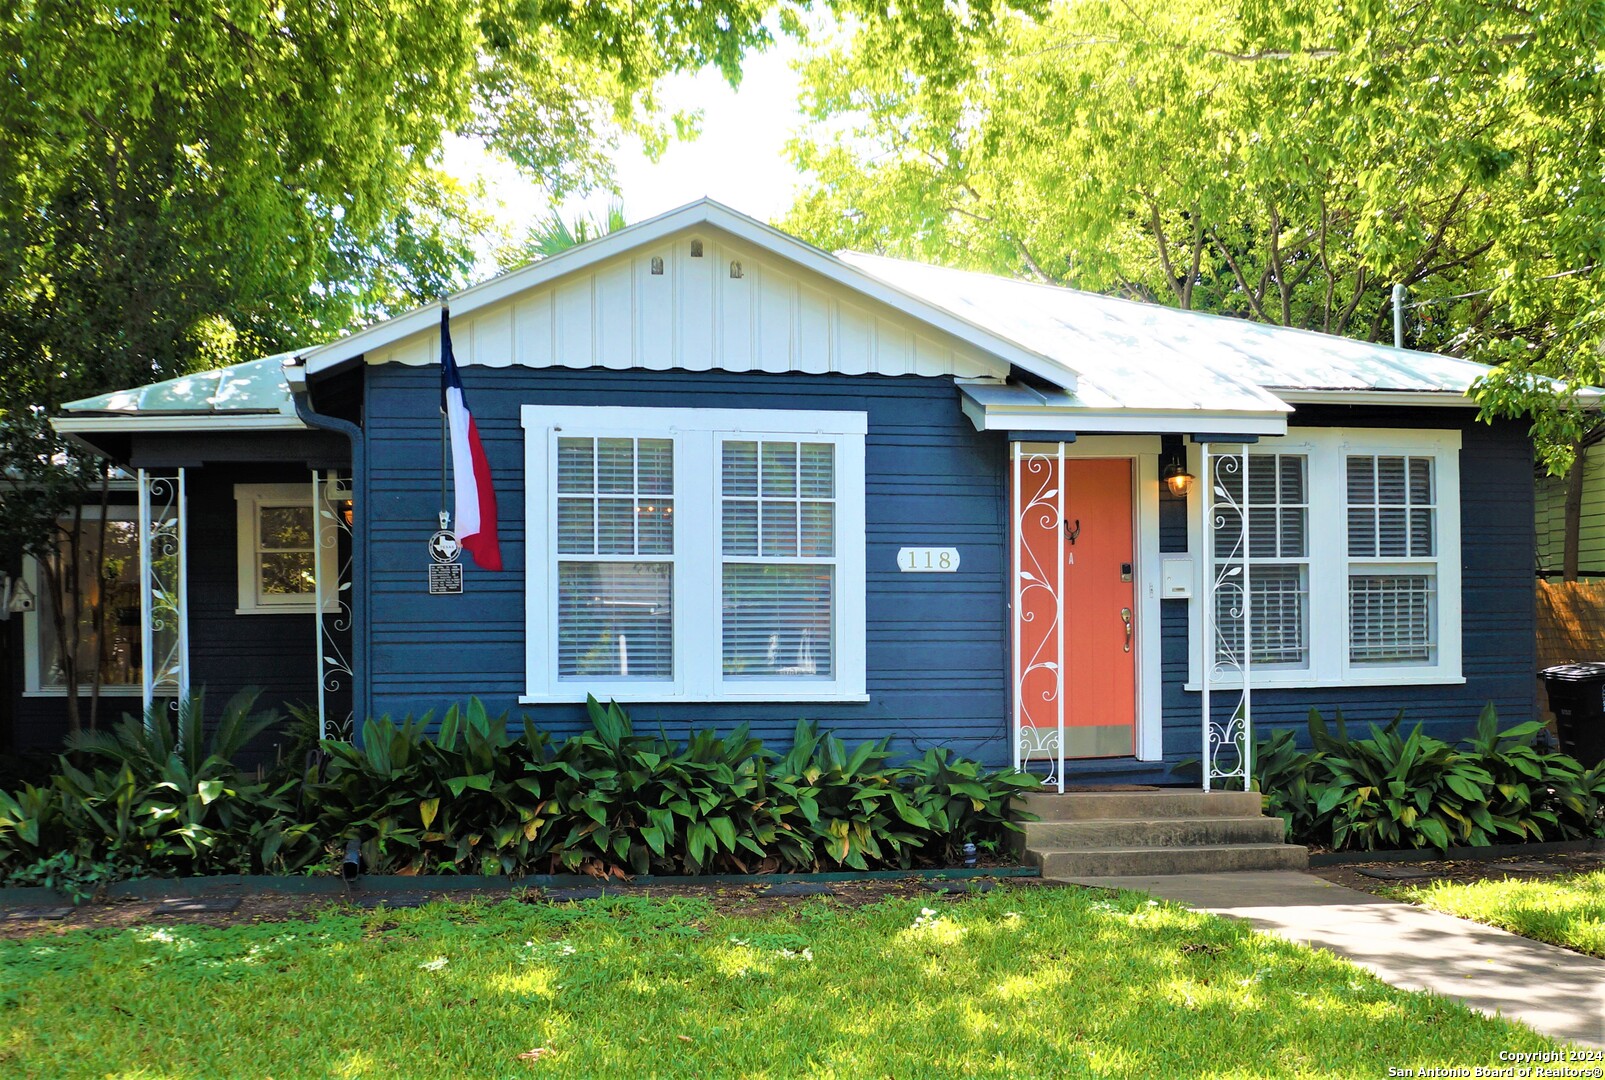 Photo of 118 Callaghan Ave in San Antonio, TX